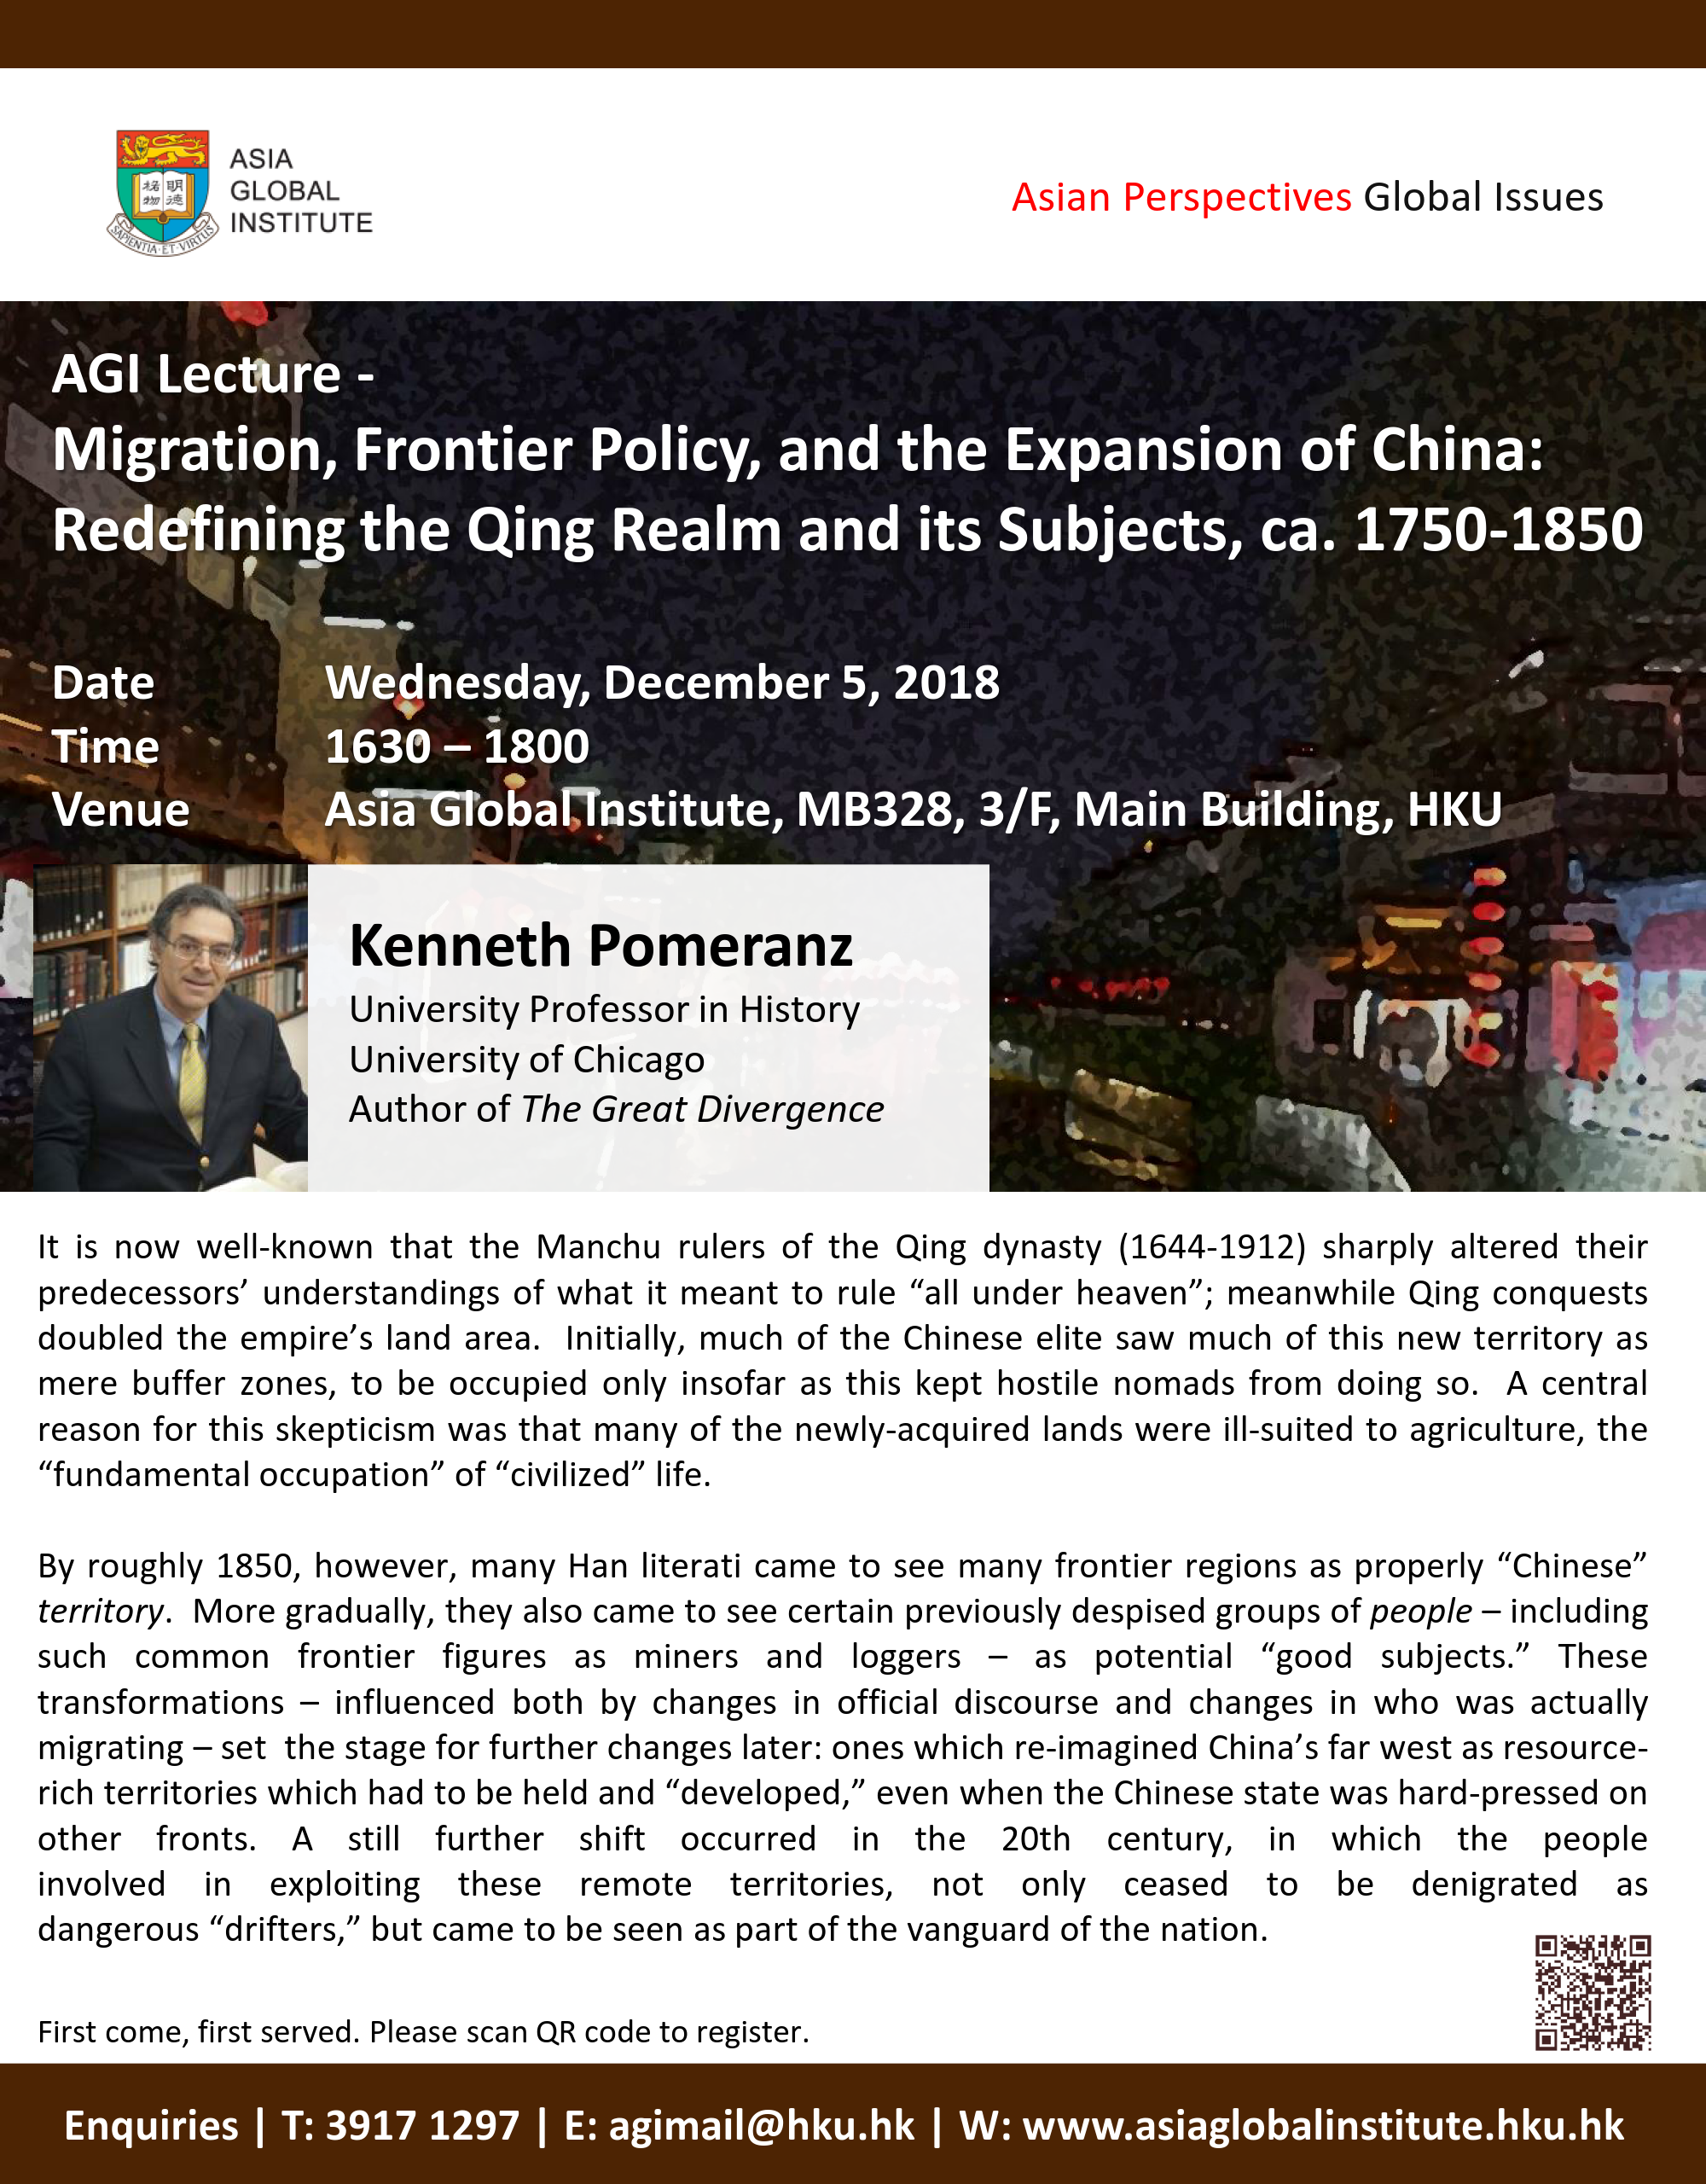 Join AGI Lecture by Prof. Kenneth Pomeranz, the author of The Great Divergence